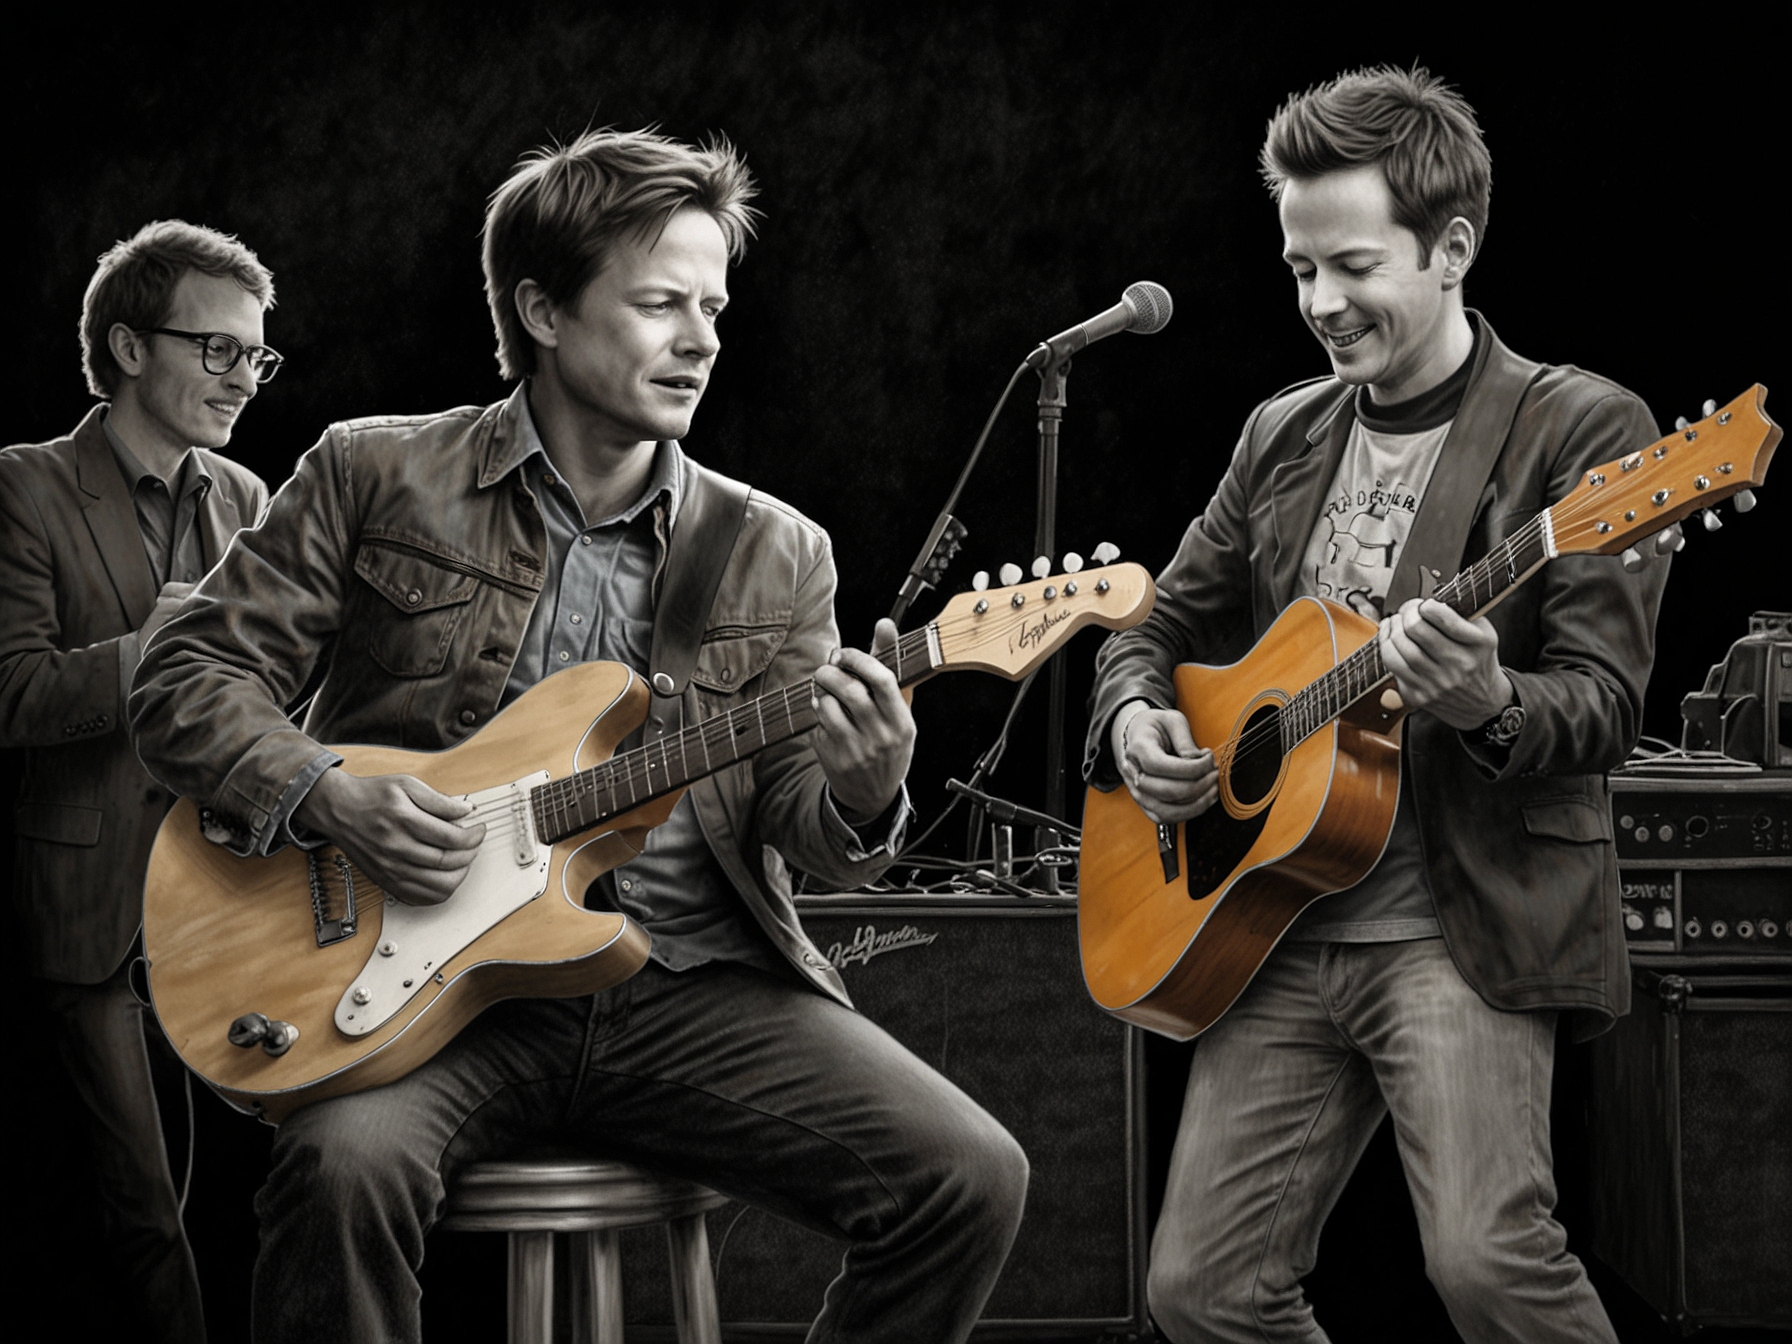 Michael J. Fox enthusiastically playing guitar alongside Coldplay during their rendition of 'Johnny B. Goode,' evoking memories of 'Back to the Future' and thrilling the audience.